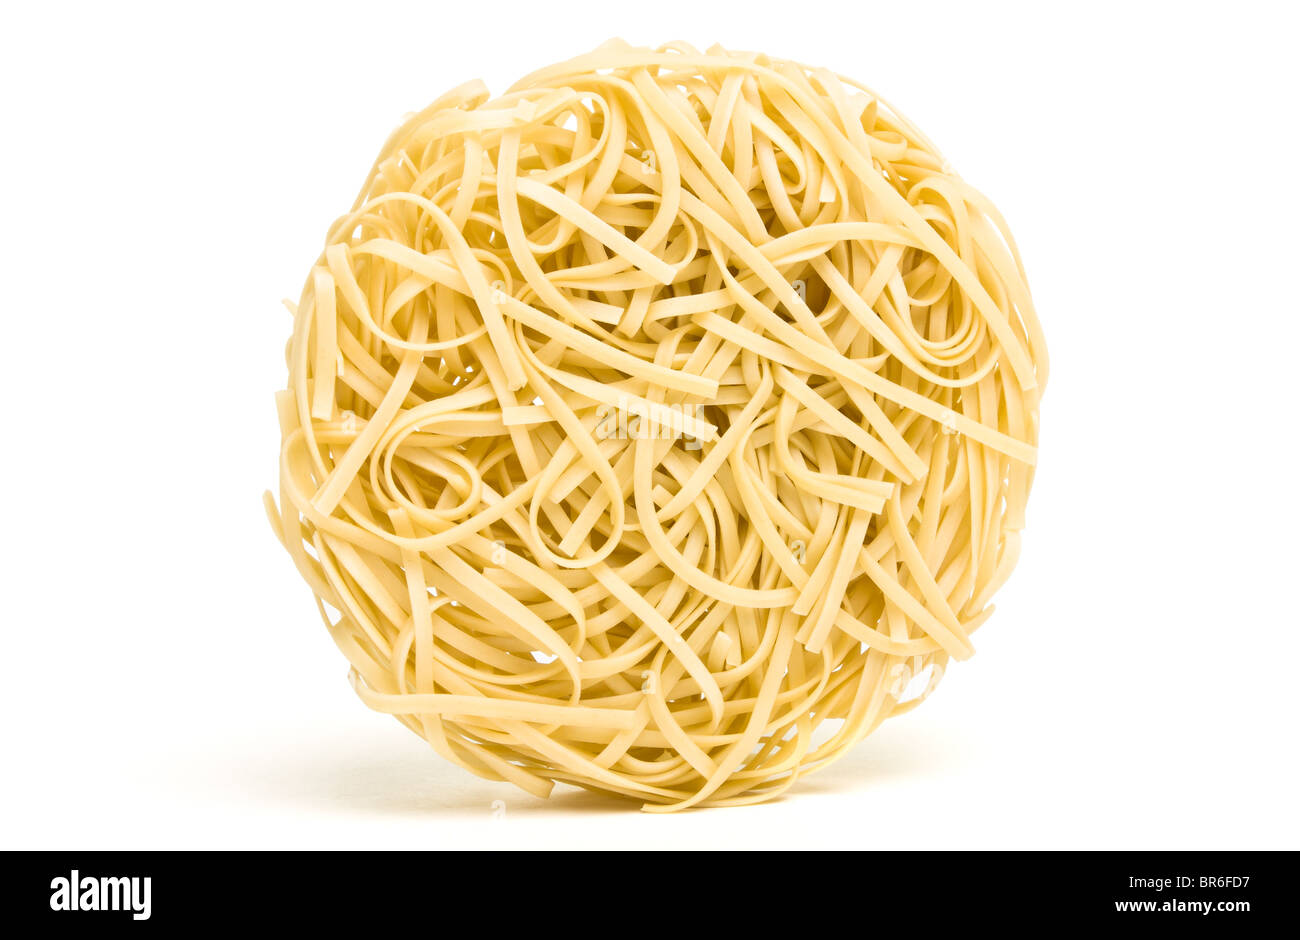 Nests of dried noodles from low perspective isolated on white. Stock Photo